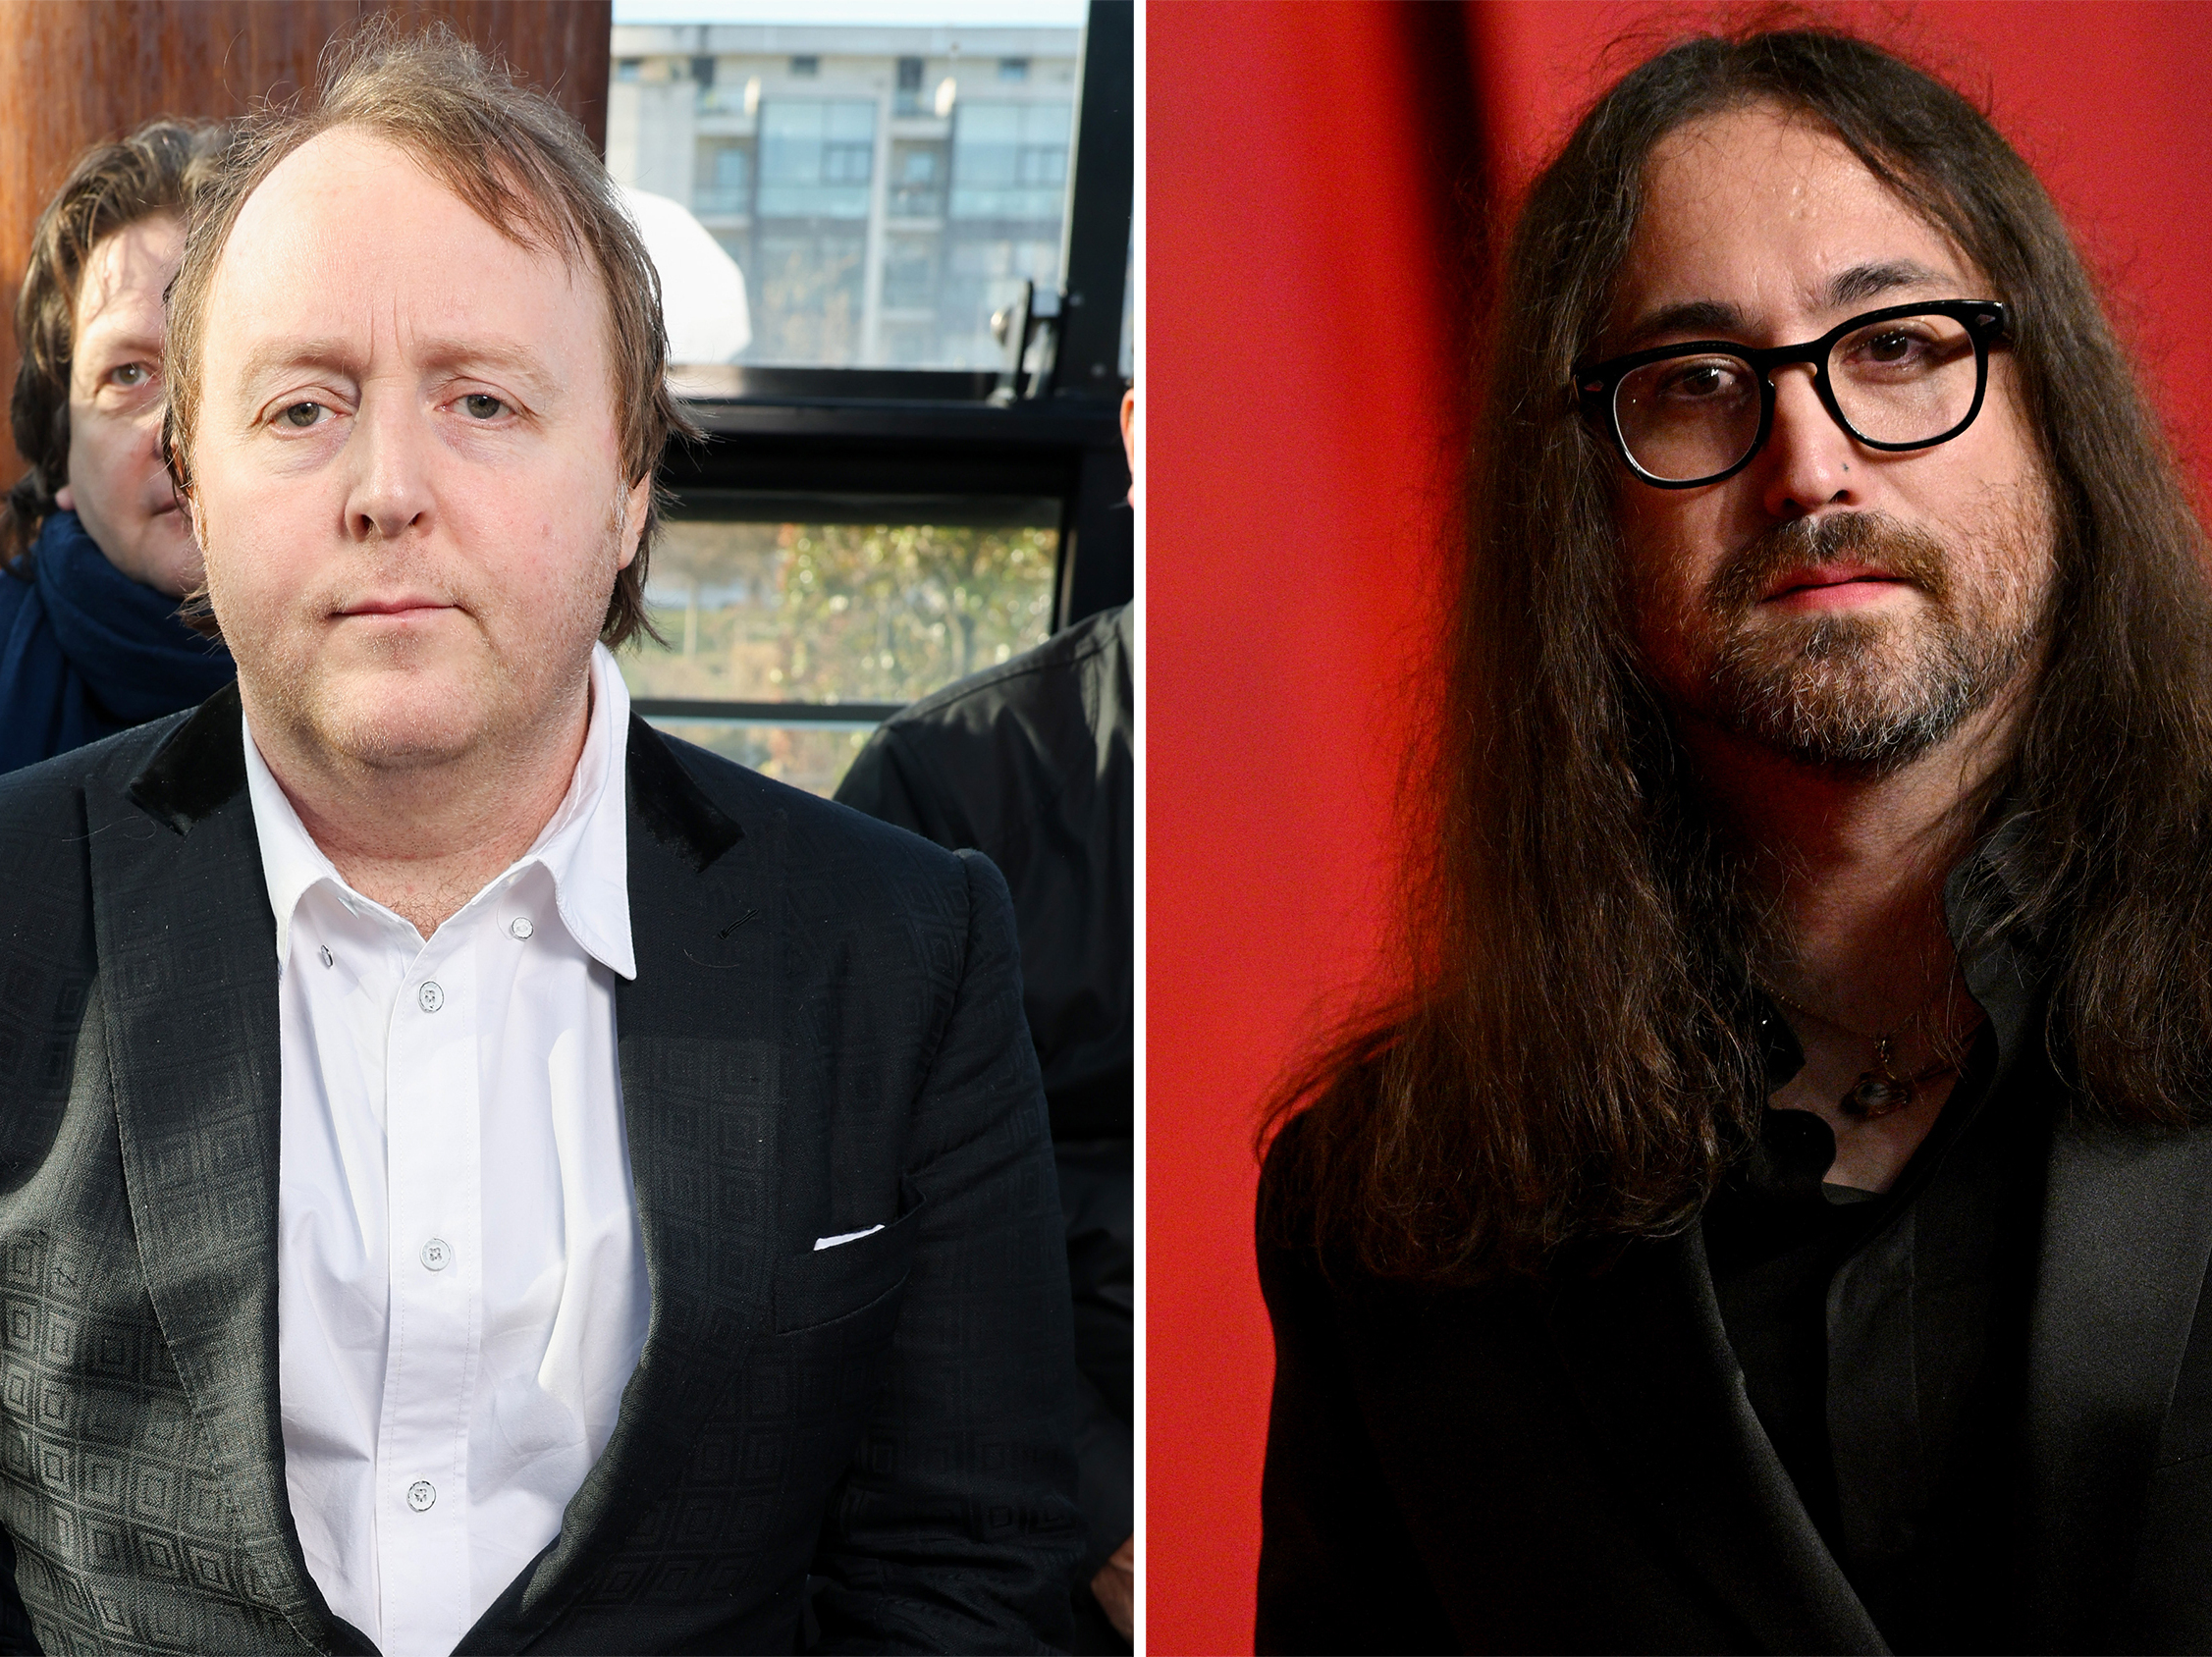 A new Lennon-McCartney collab has dropped — but this time, it’s by the Beatles’ sons